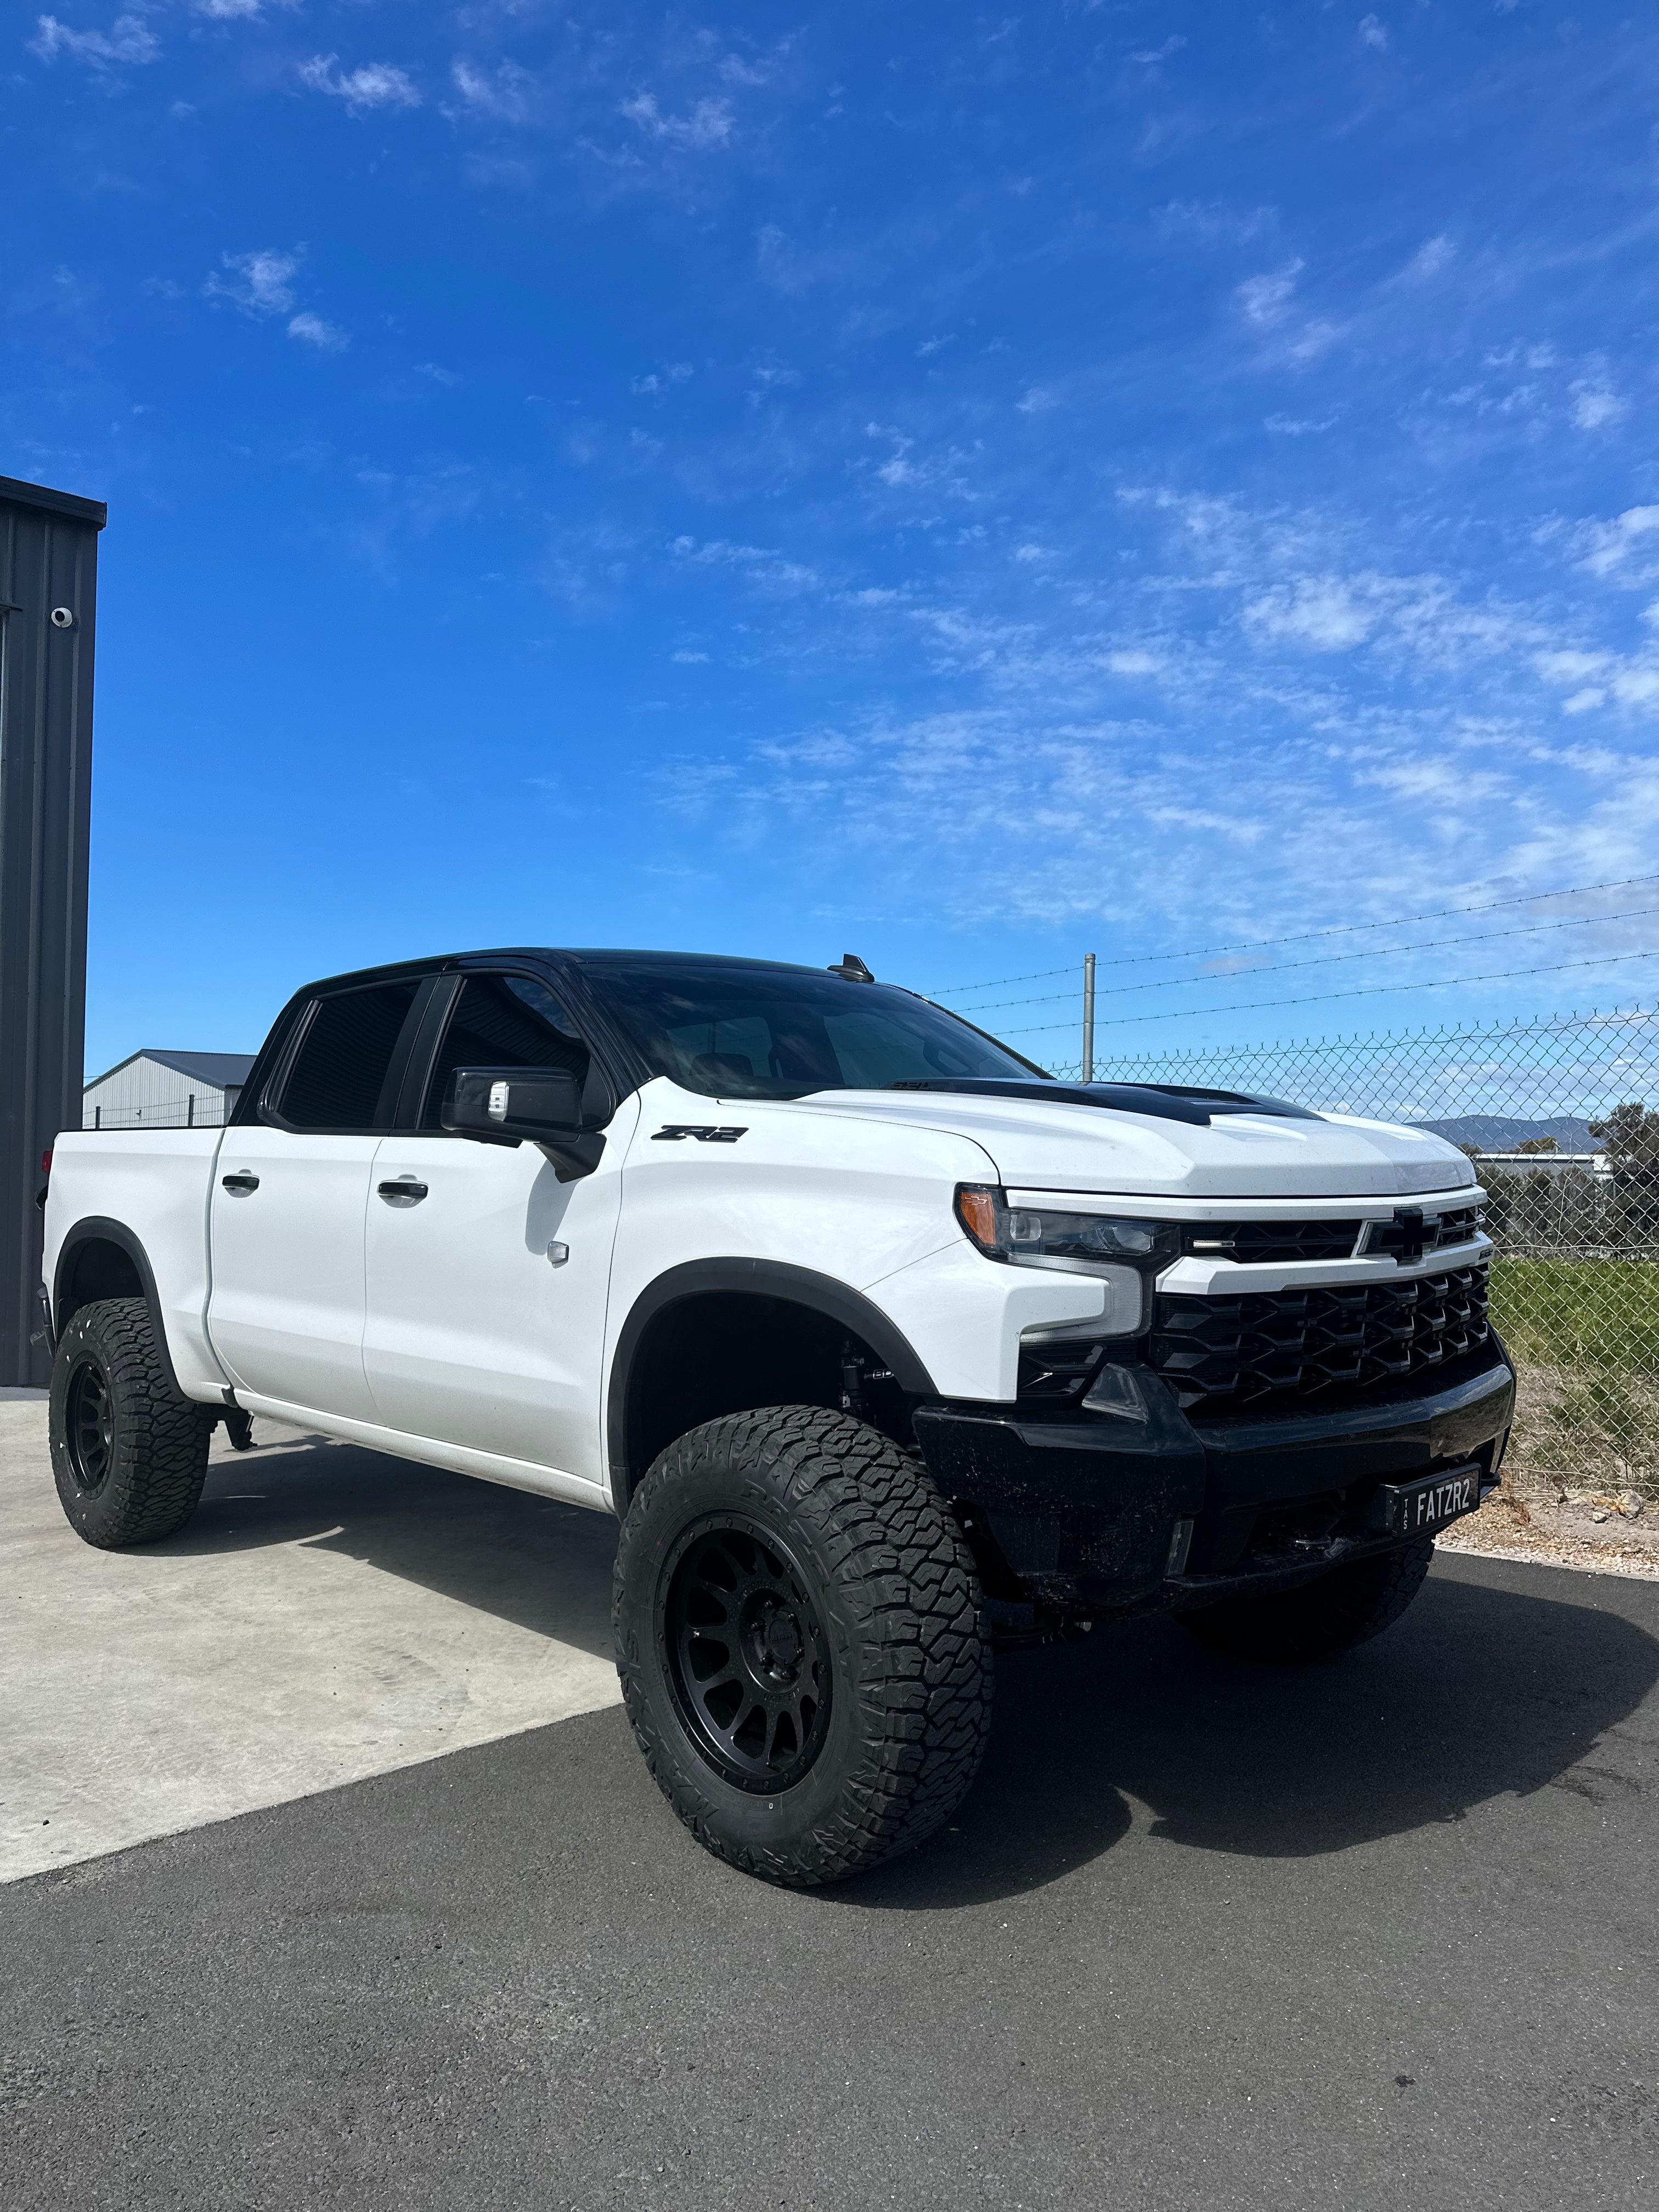 BDS Suspension 6" Lift Kit for 2019+ Chevy Silverado 1500 with Fox 2.5 Performance Elite Shocks - Outback Kitters